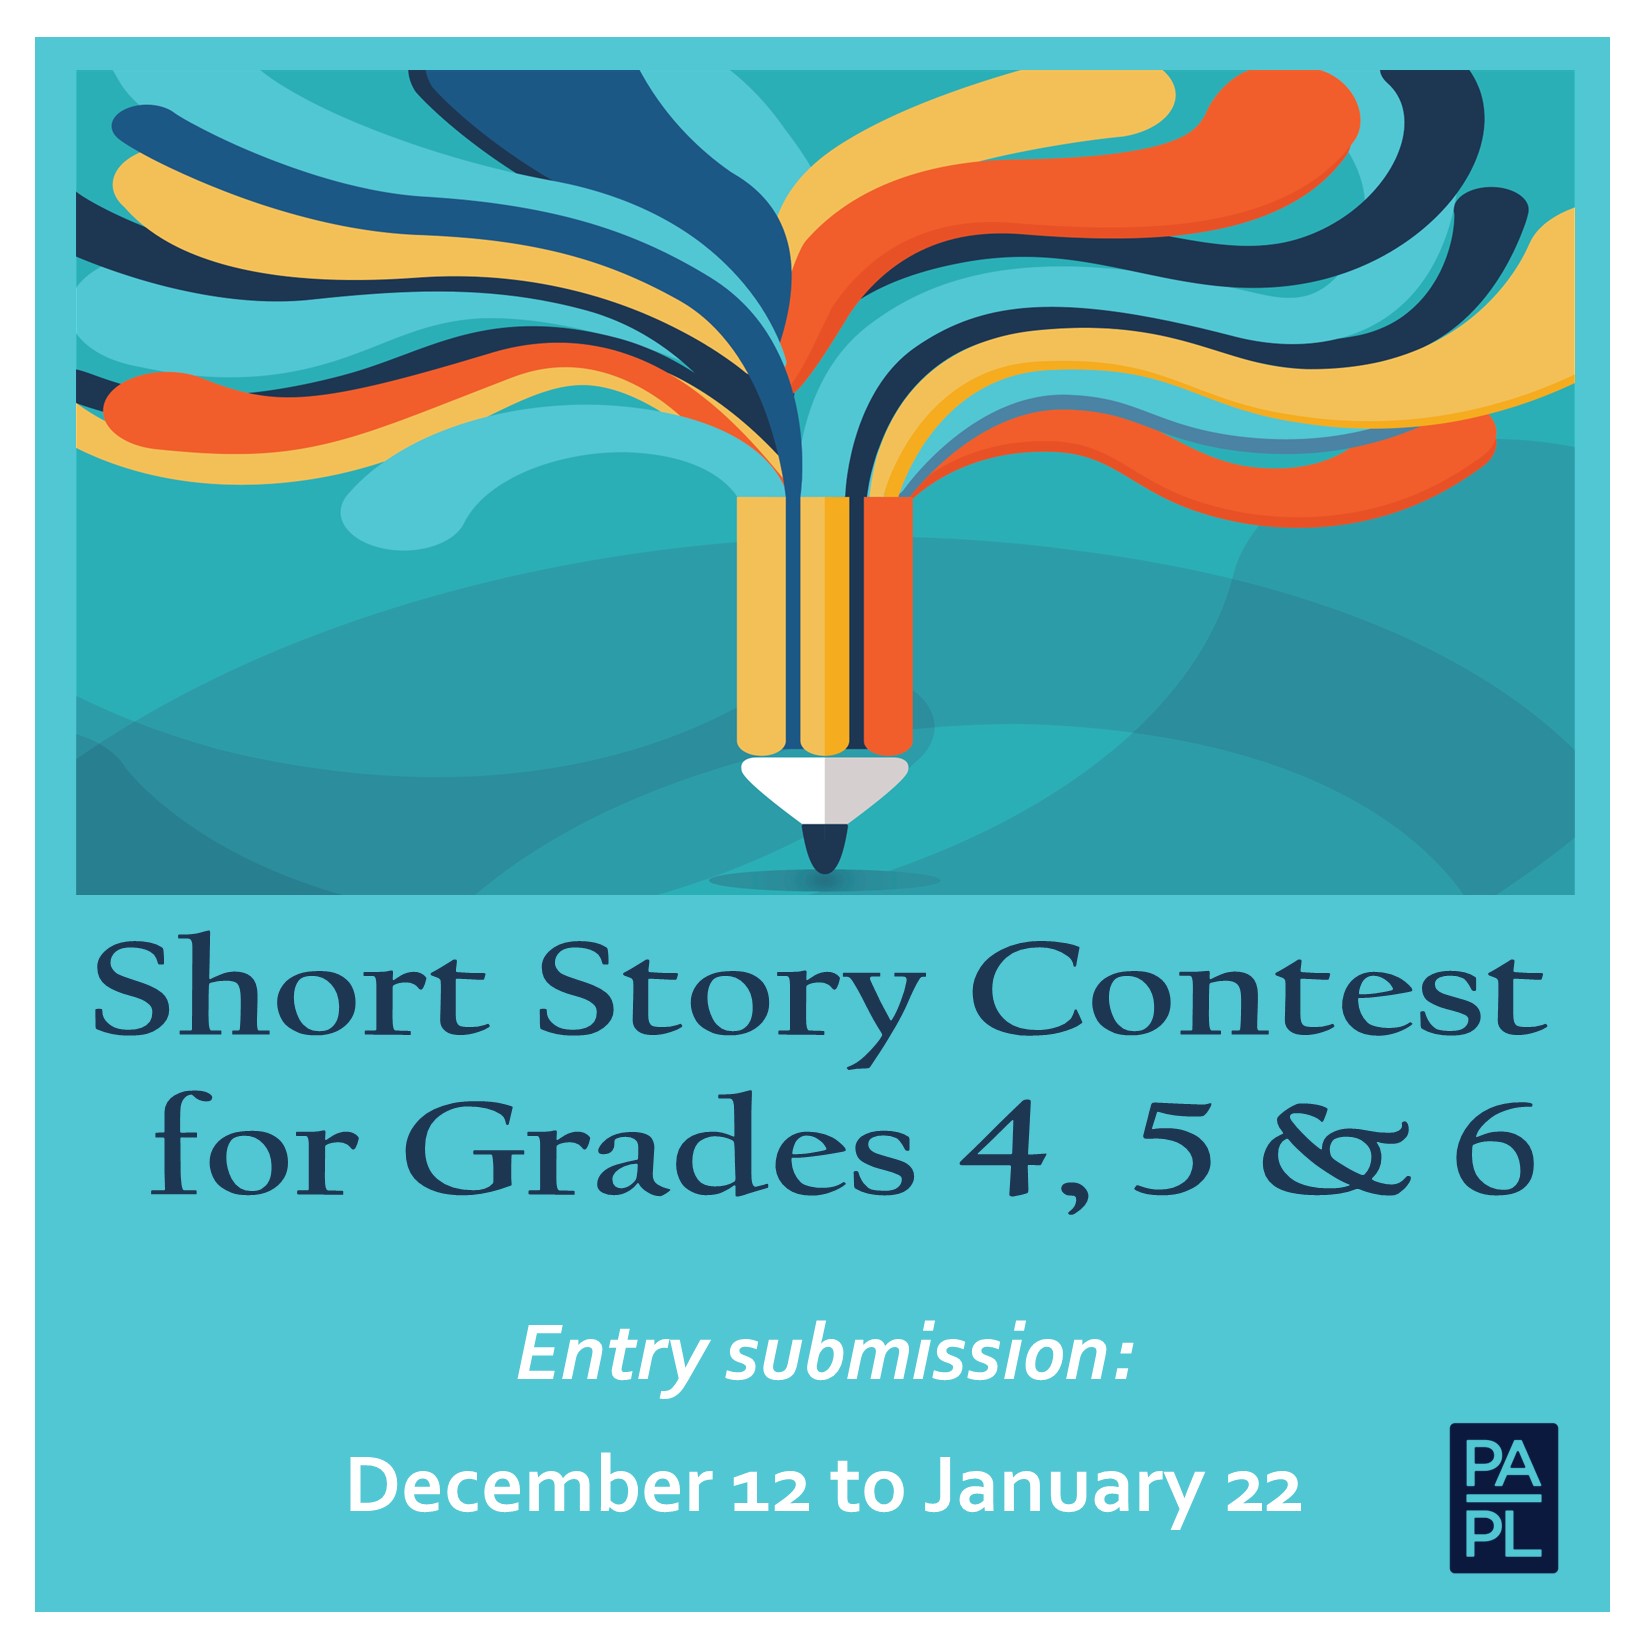 Short Story Contest Grades 4, 5 & 6 Entries 12/12 to 1/22